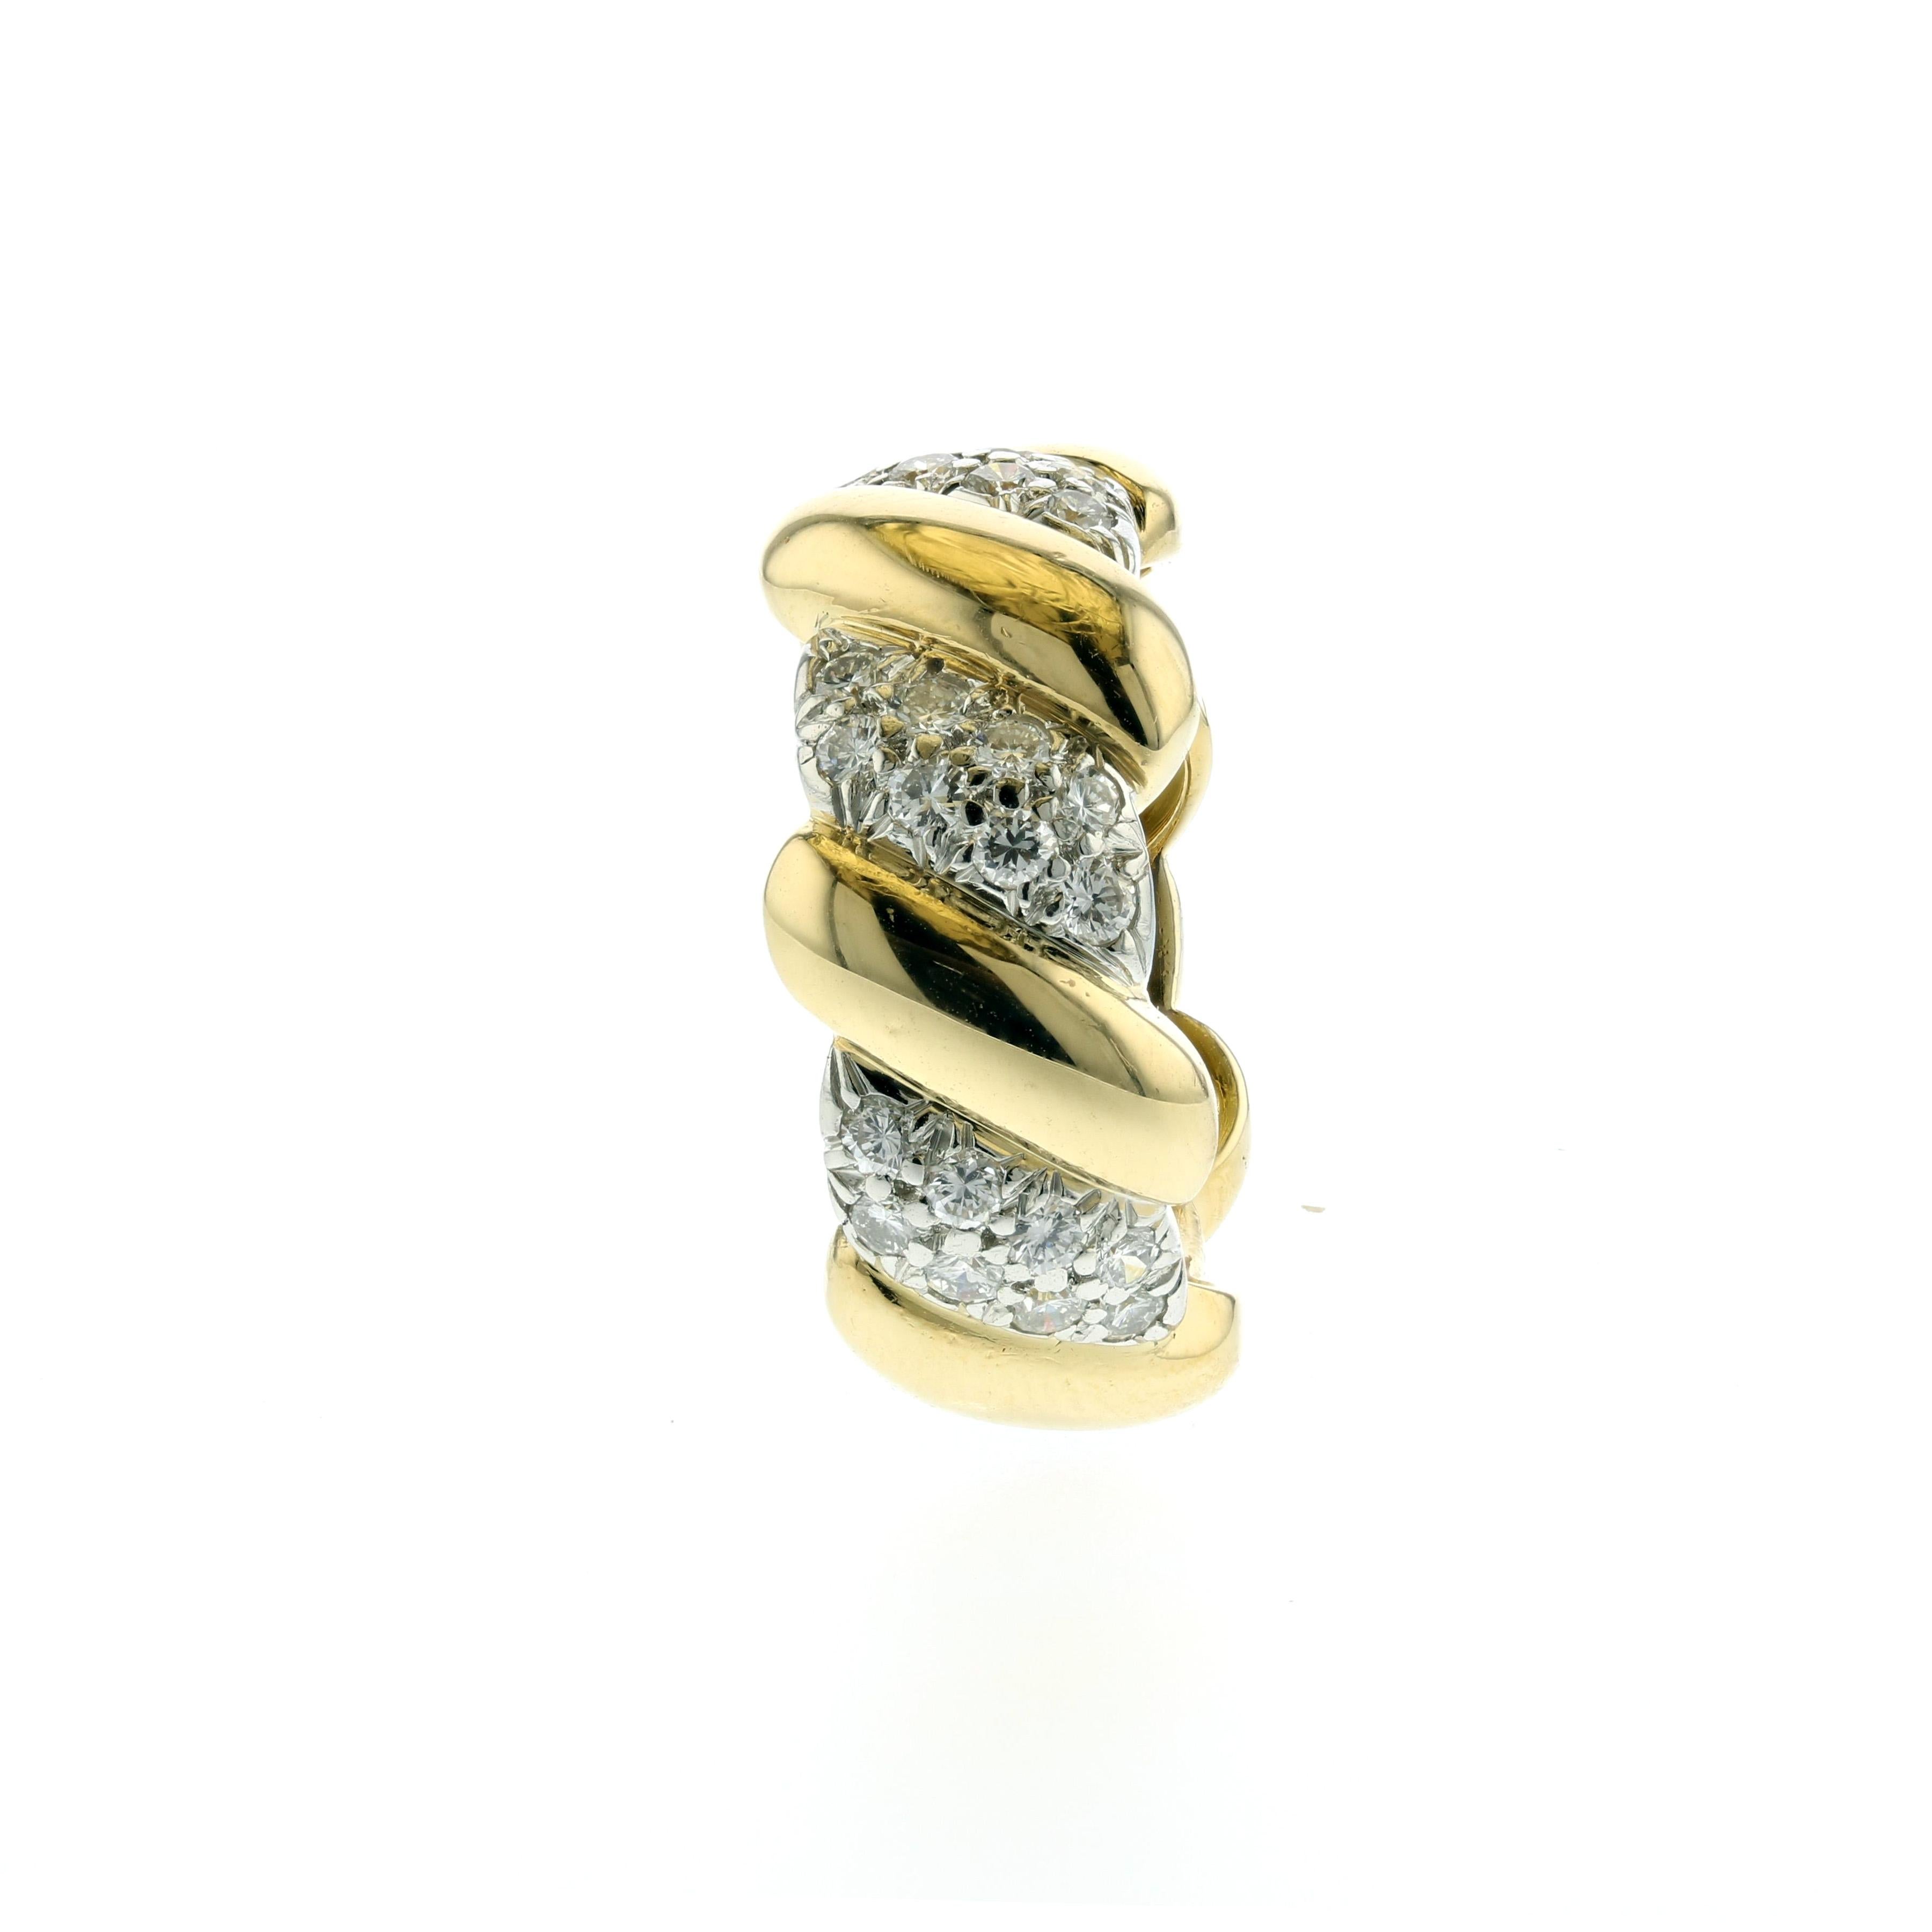 David Webb band in 18K yellow gold with diamonds set in platinum.   The ring has forty-eight round brilliant-cut diamonds weighing  1.45 carats; F-G color and VS-SI1 clarity.  Ring measures 7/16 inches wide.